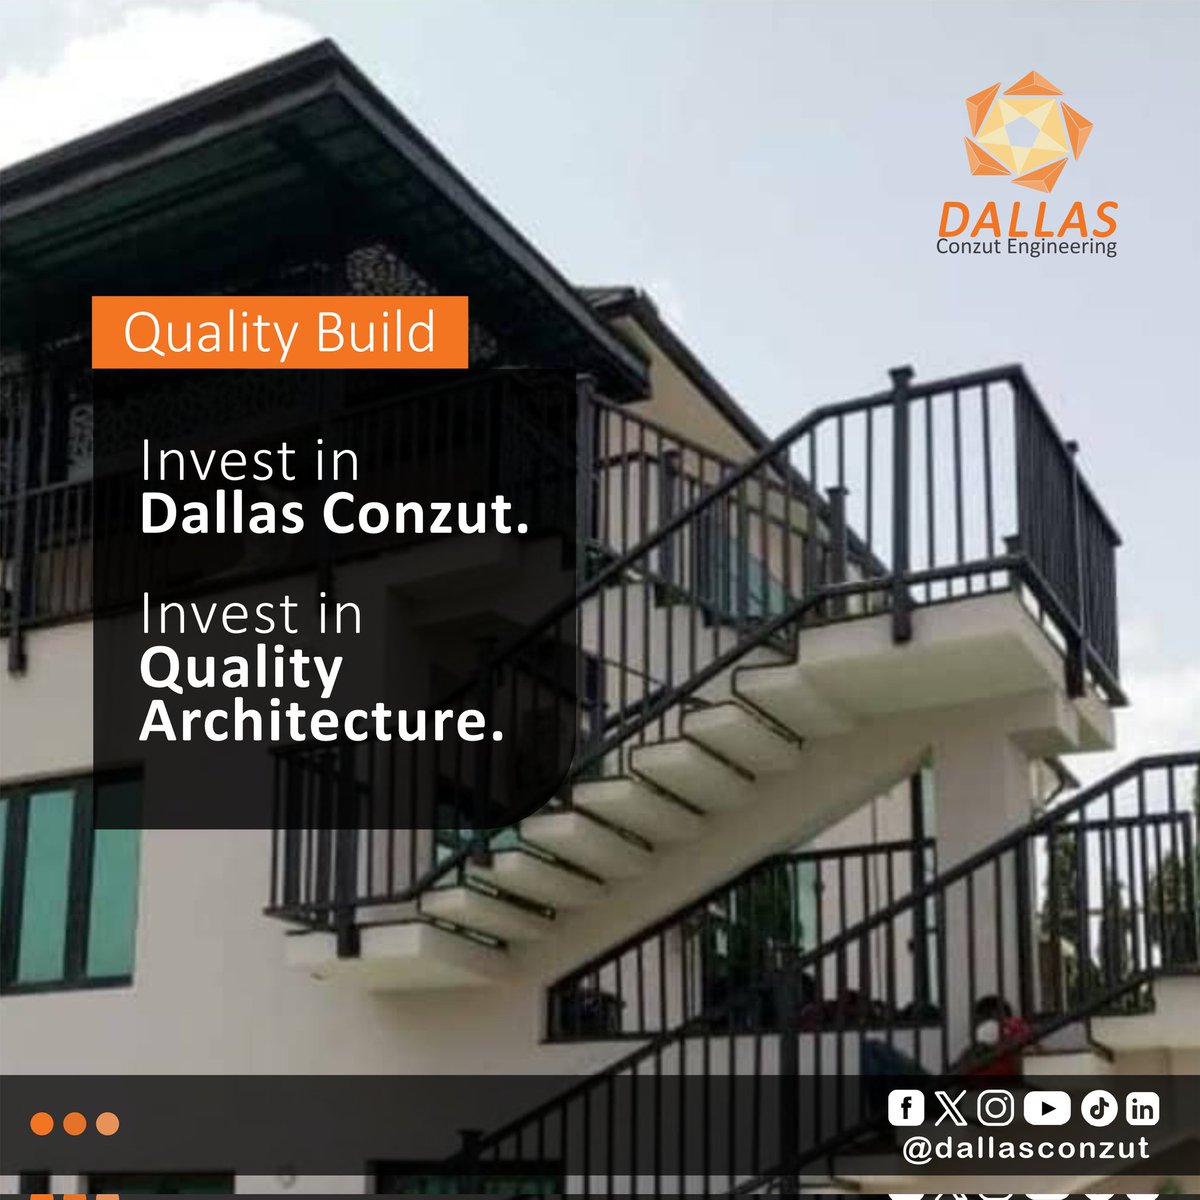 Dallas Conzut Engineering sets the standard for quality builds that stand the test of time. Invest in excellence,Invest in quality Architecture.Invest in Dallas Conzut. 🏗️ 

#QualityBuild #DallasConzutEngineering #InvestInExcellence #ArchitecturalPerfection #BuiltToLast